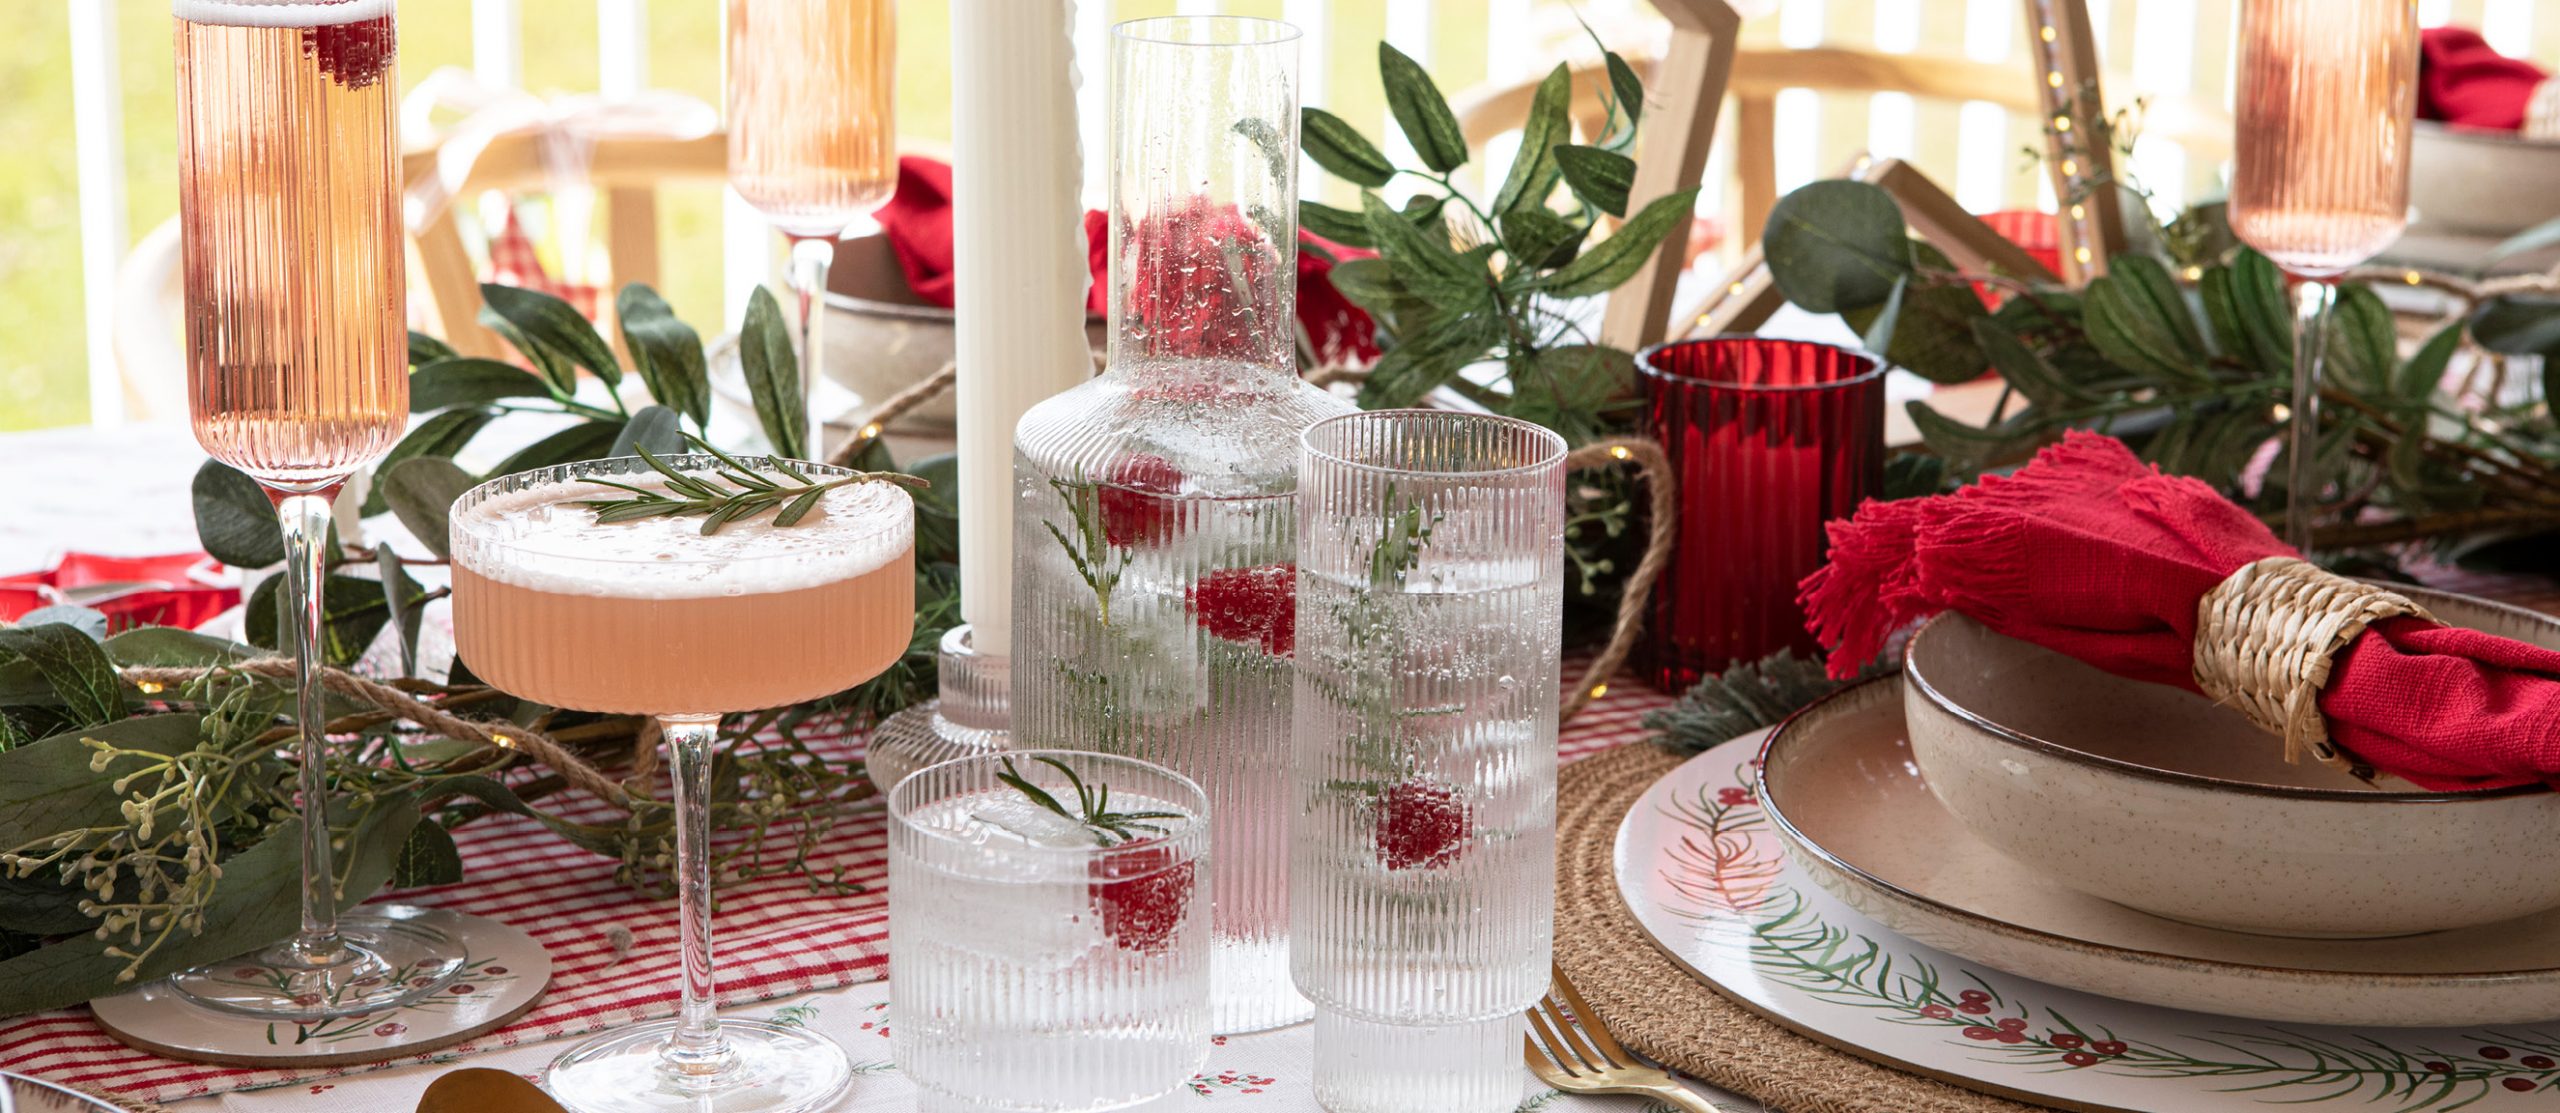 Get creative Christmas table decorations